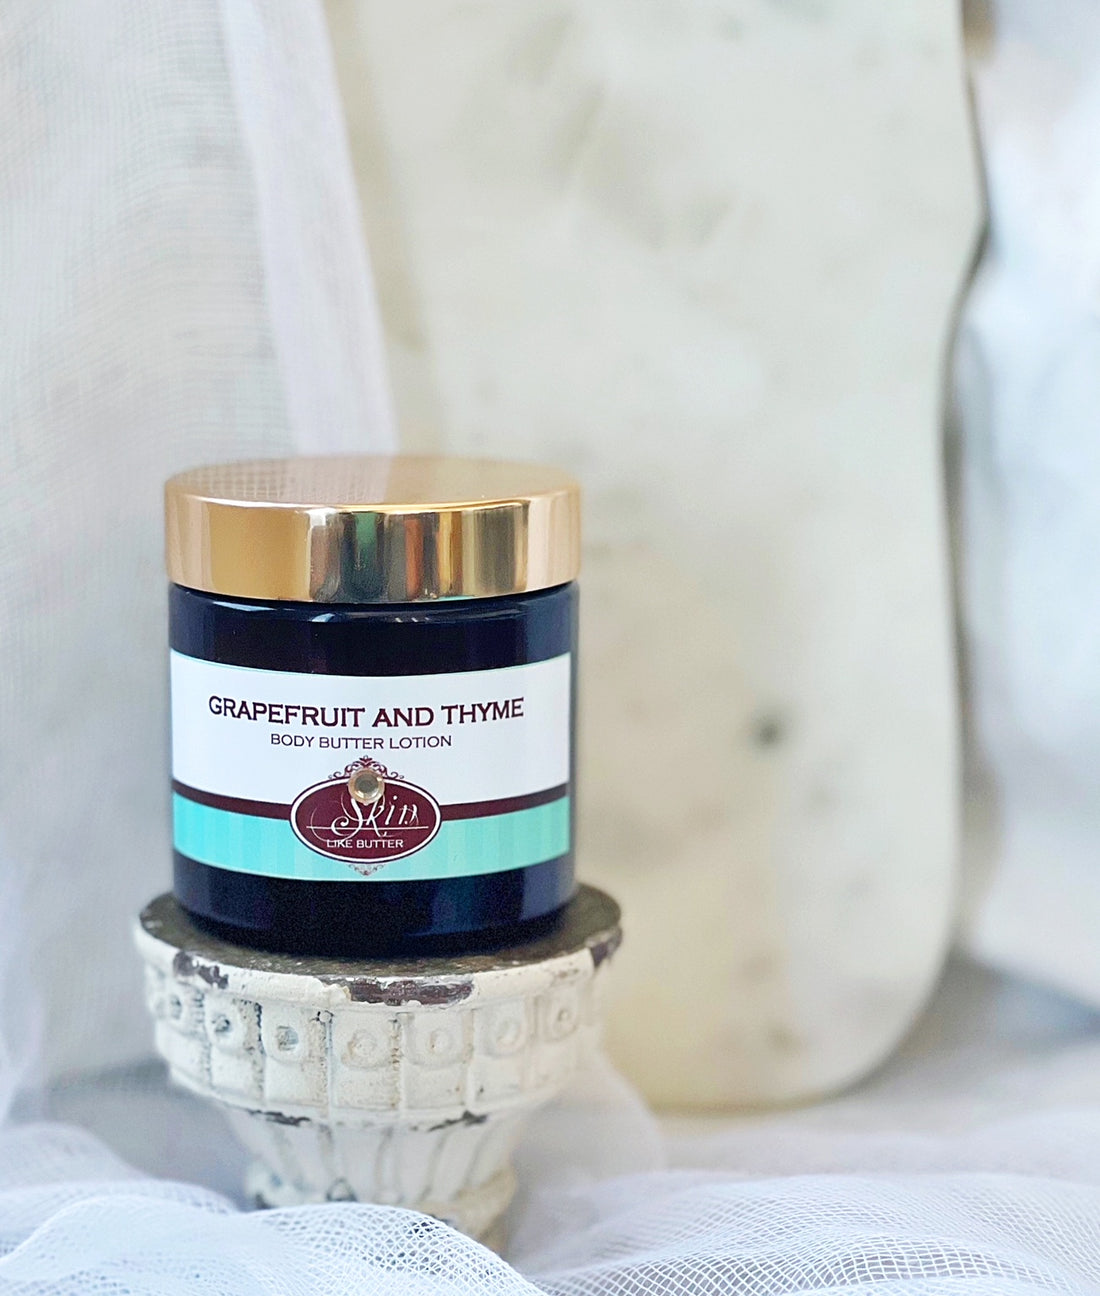 BAMBOO scented Body Butter, waterfree and non-greasy, vegan